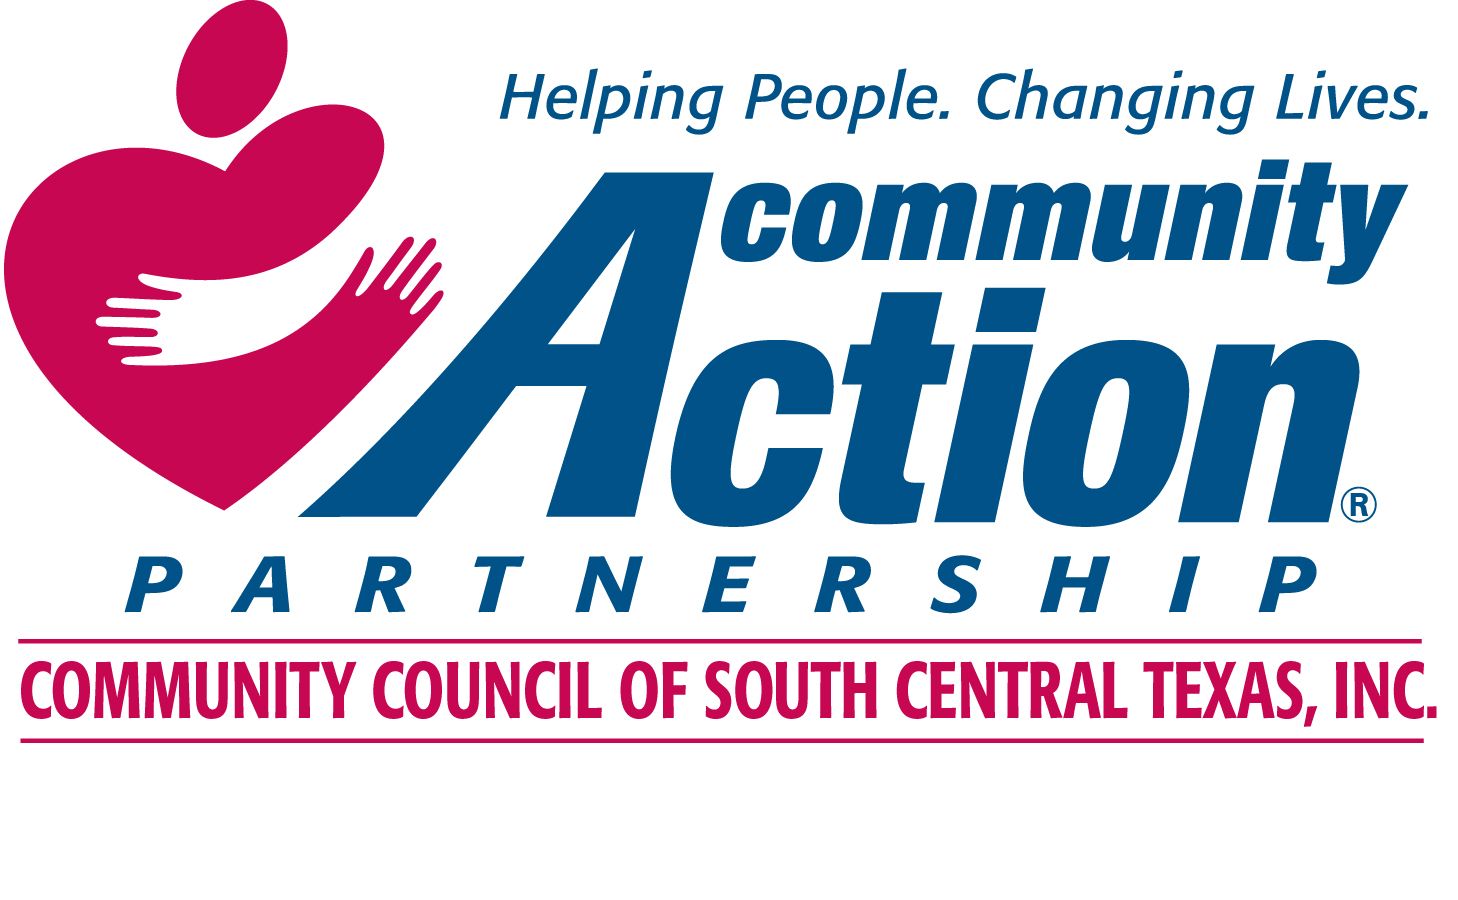 Community Council of South Central Texas